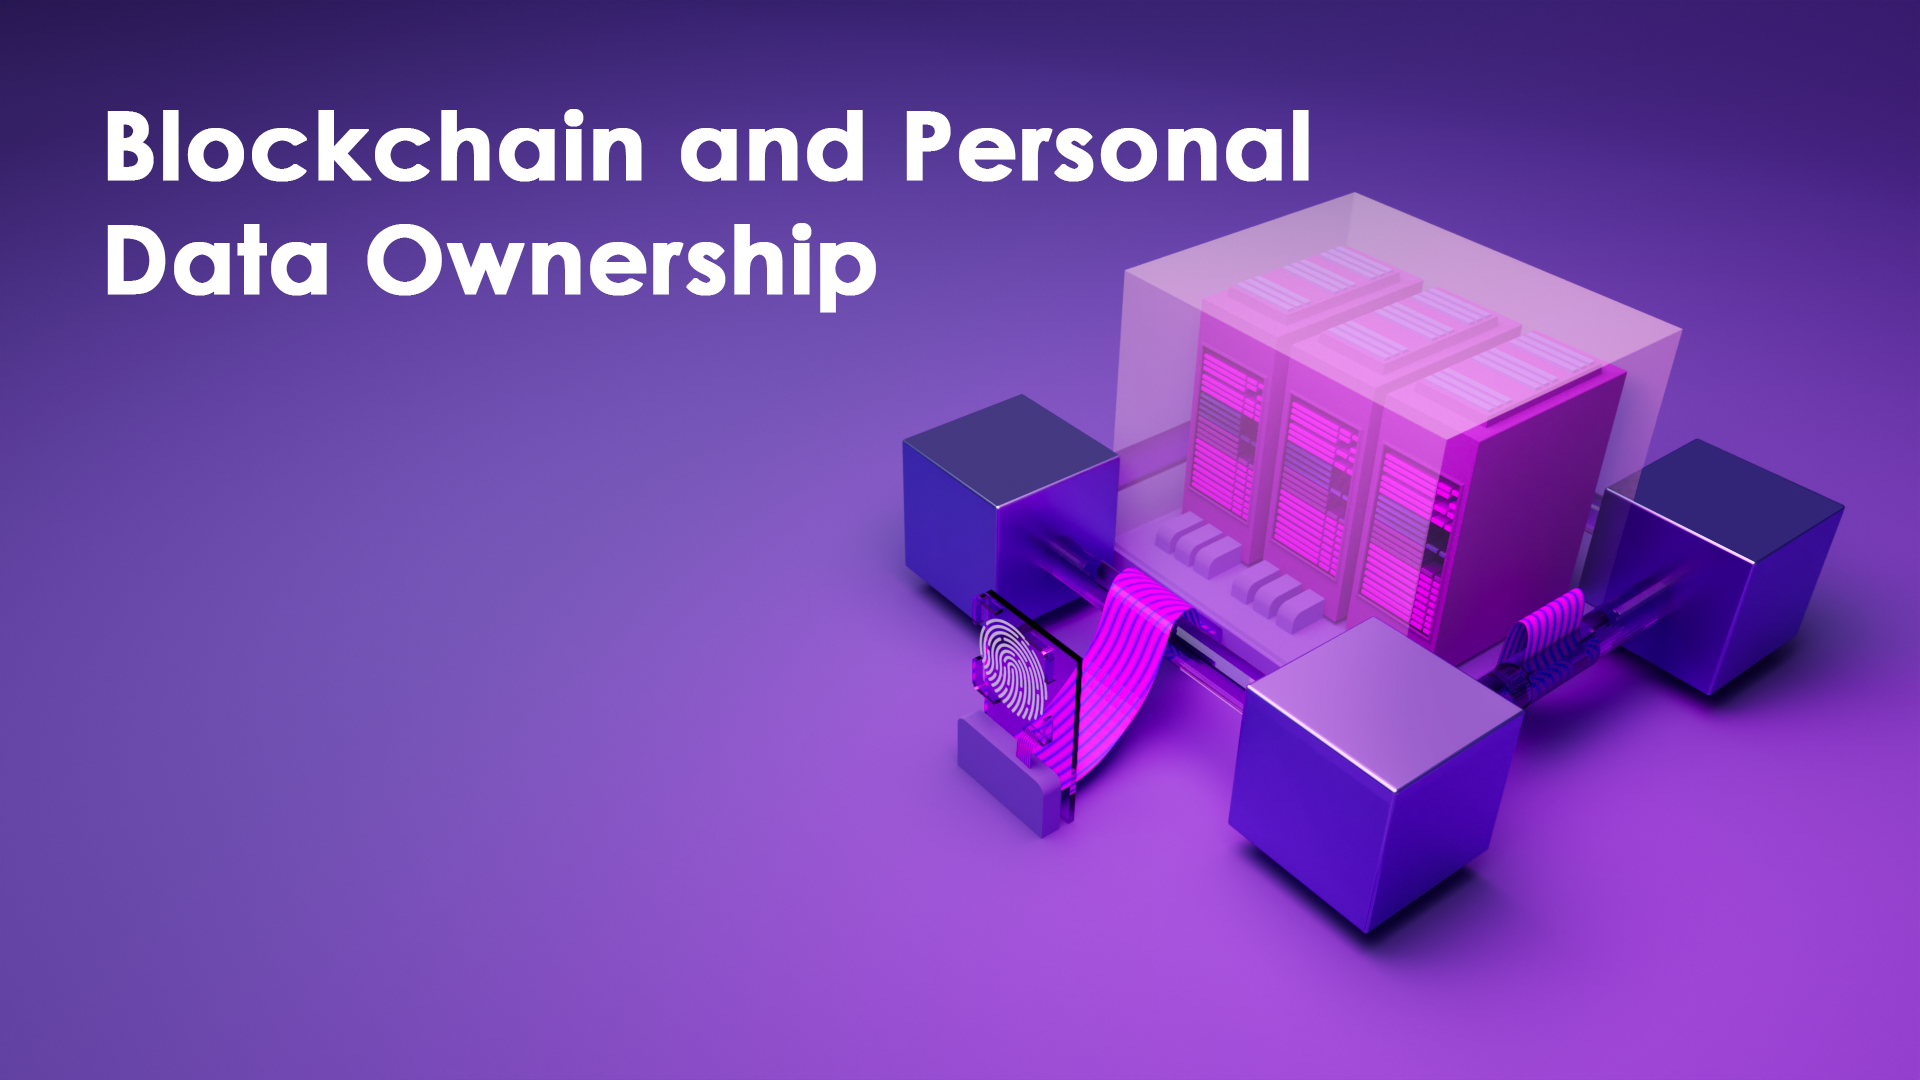 Blockchain and Personal Data Ownership